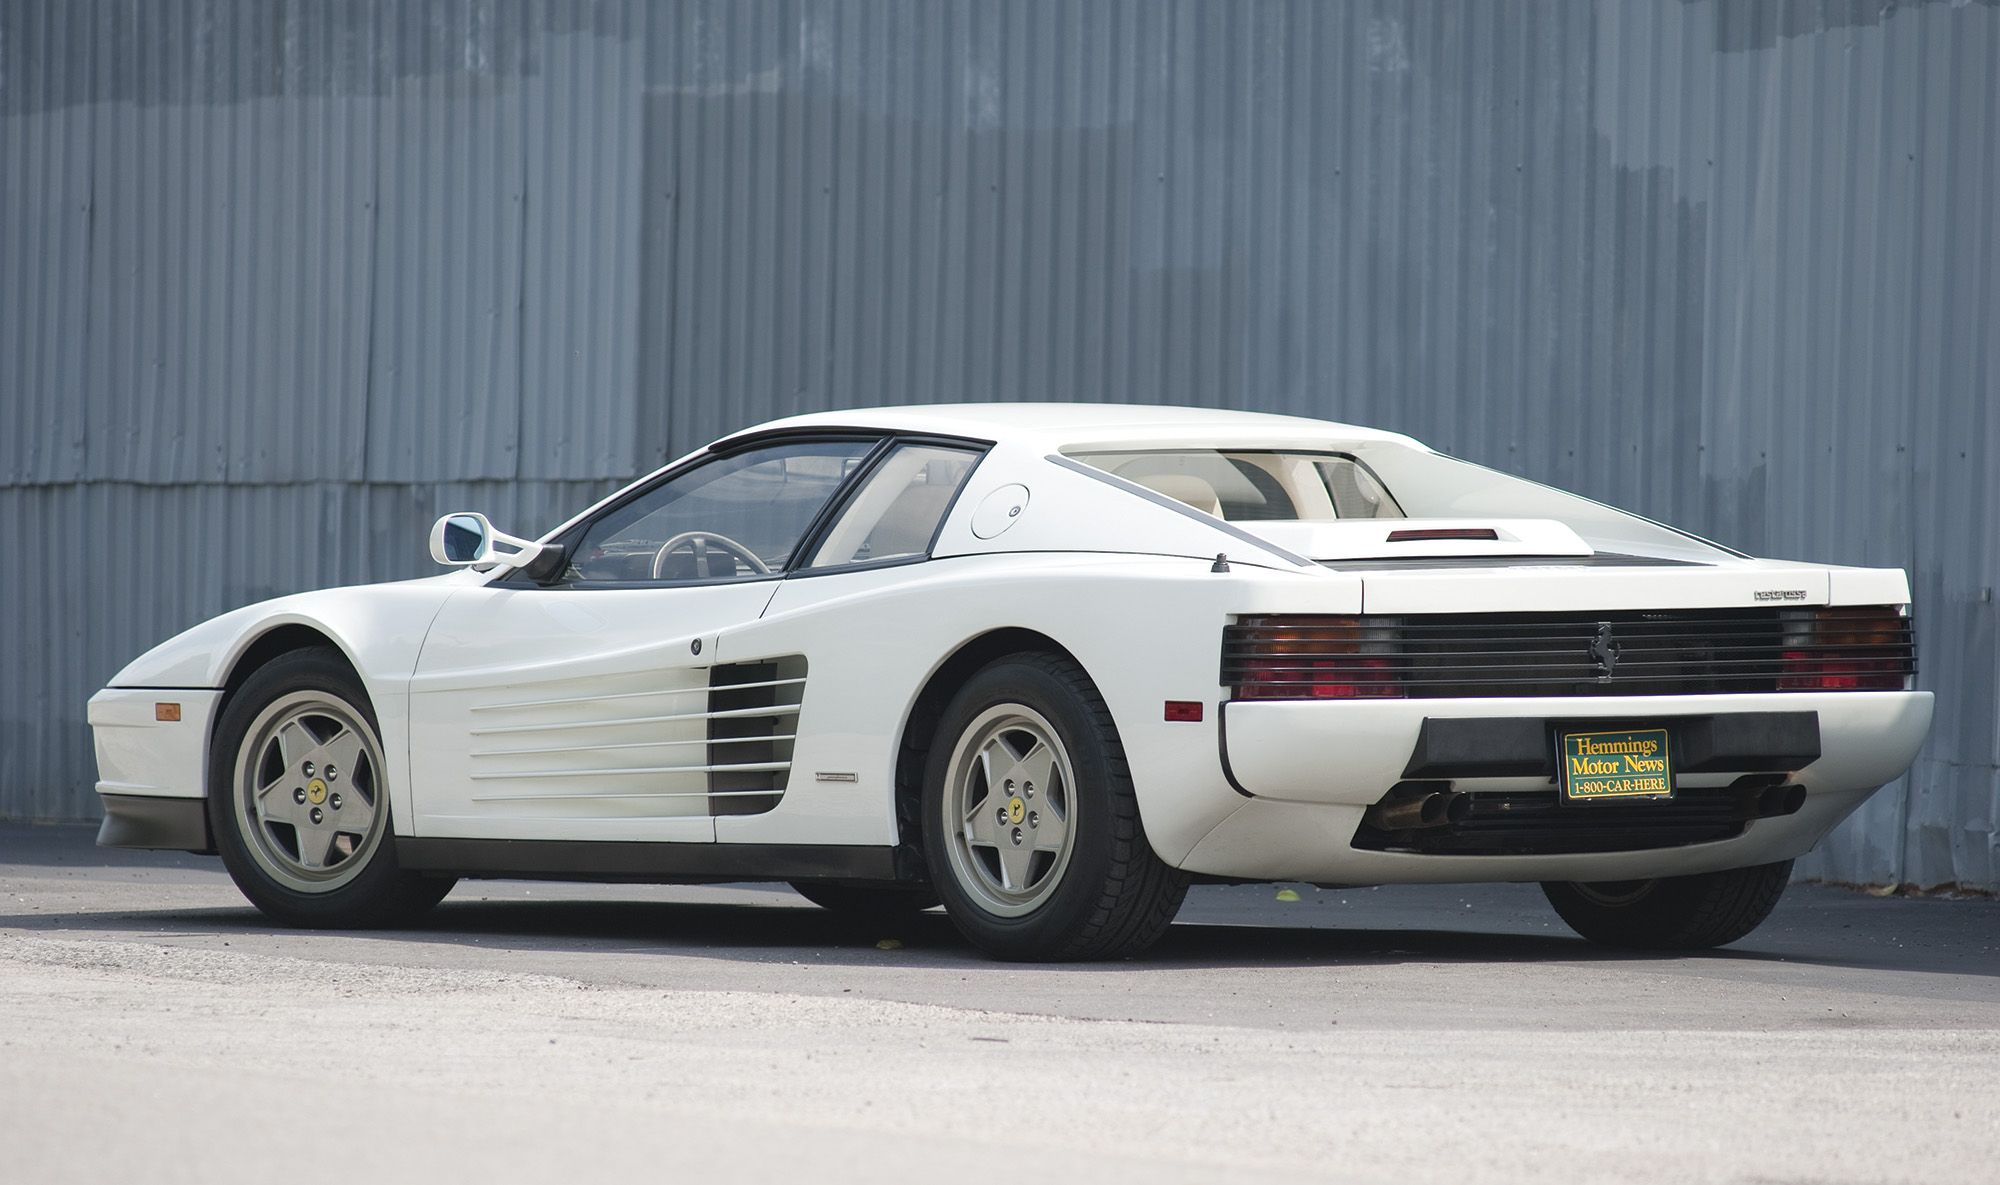 The 10 best performance cars of the 1980s